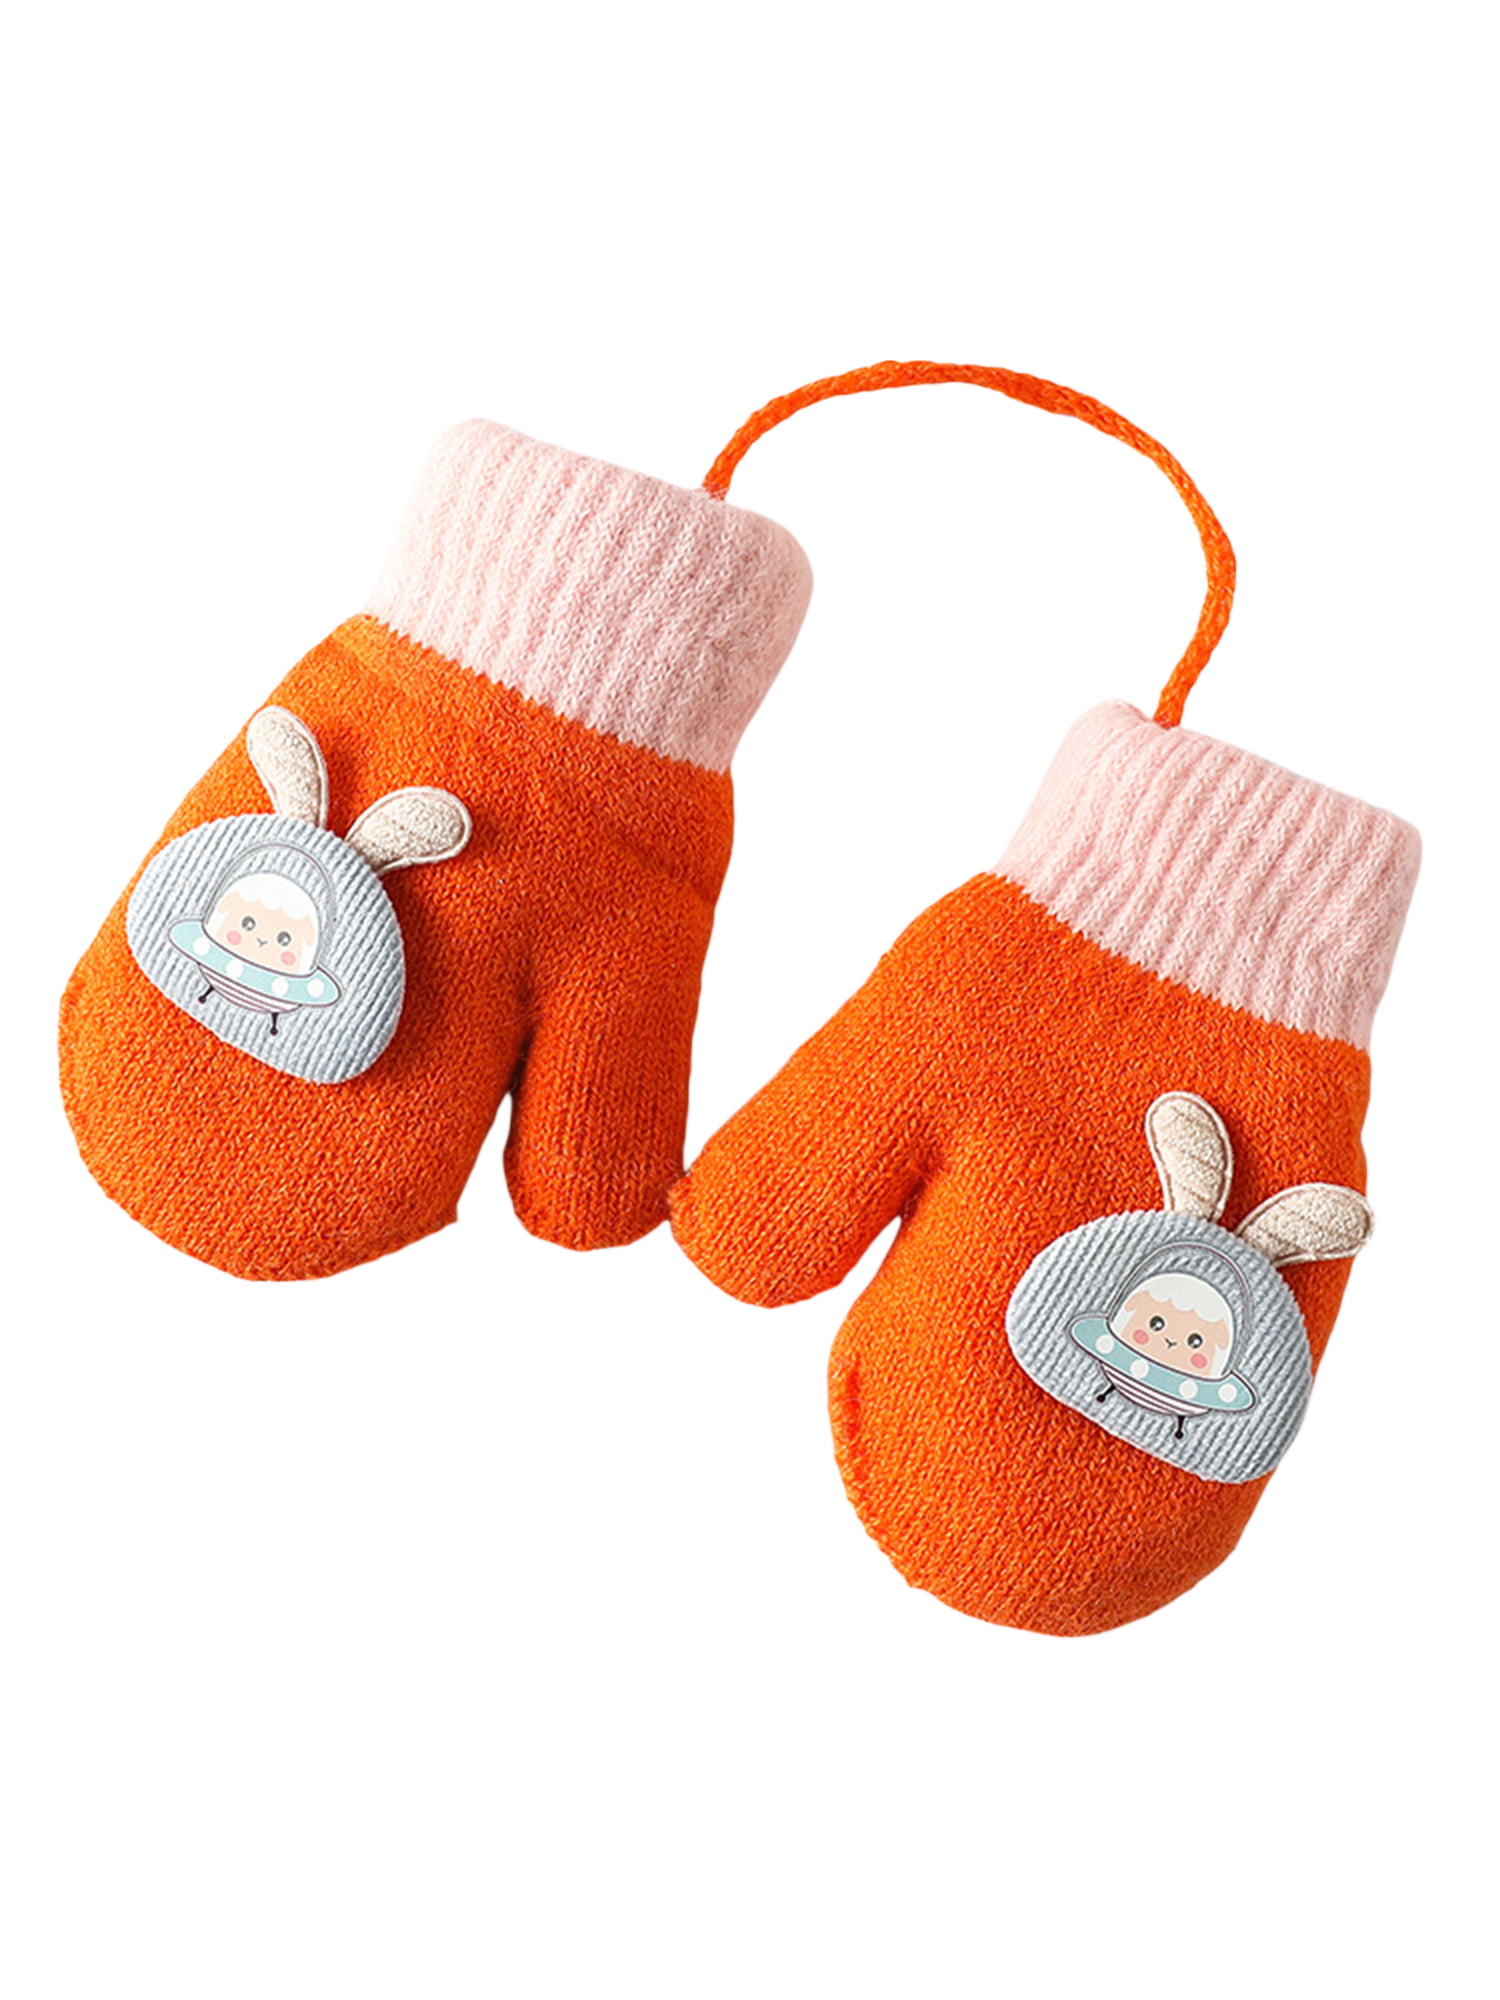 1 Pair Toddler Baby Winter Warm Gloves Thick Fur Mittens With String Hand Warmer